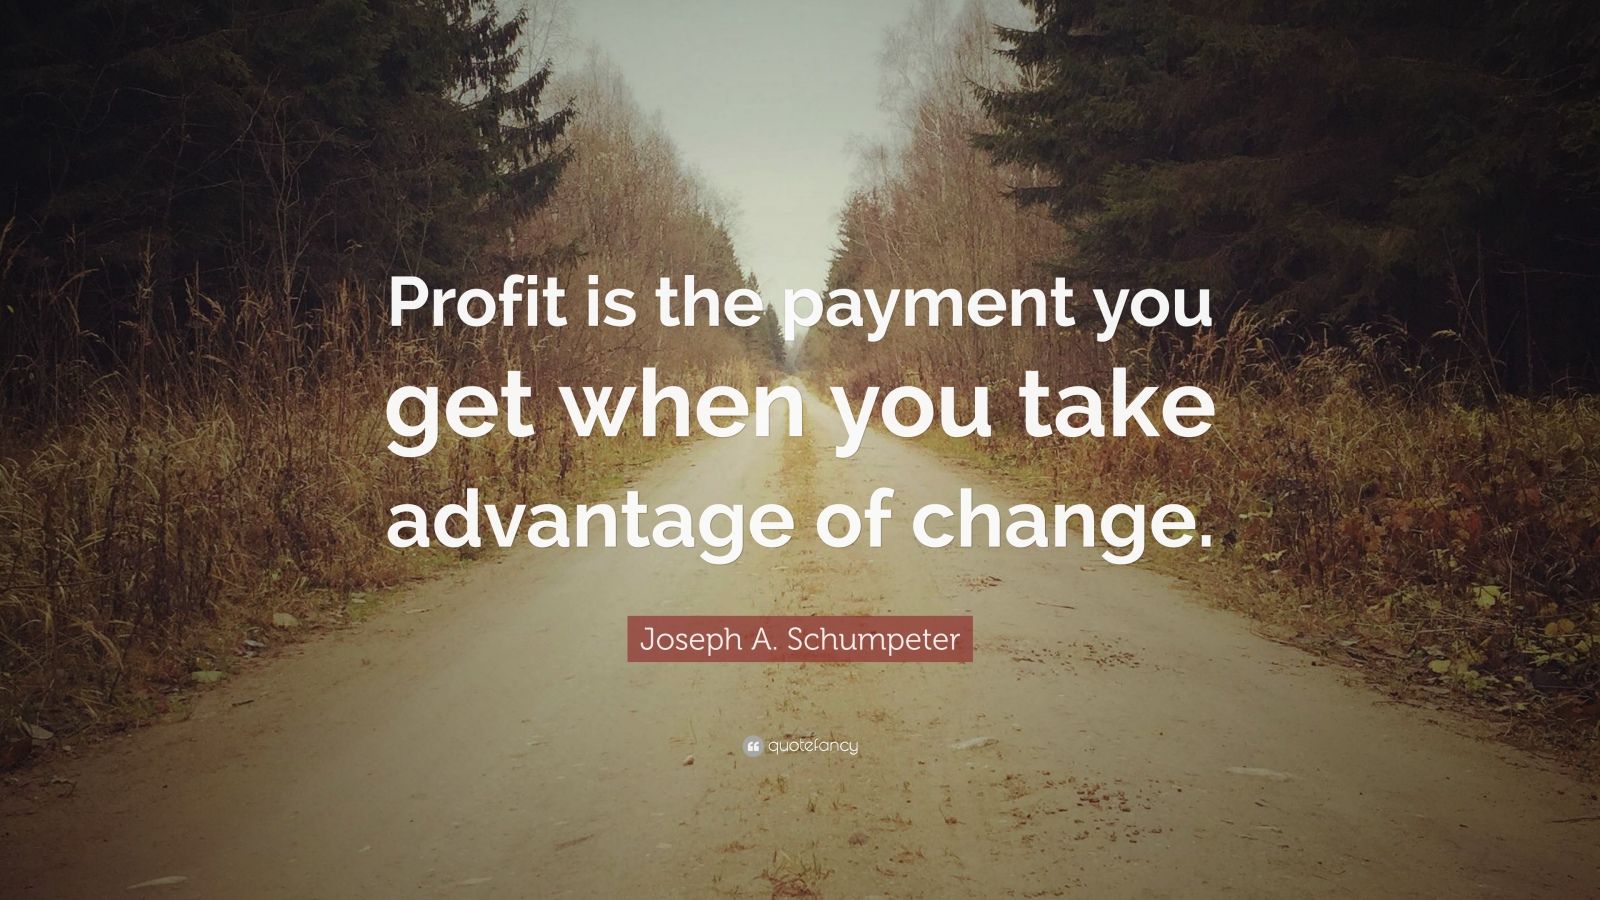 Joseph A. Schumpeter Quote: “Profit is the payment you get when you